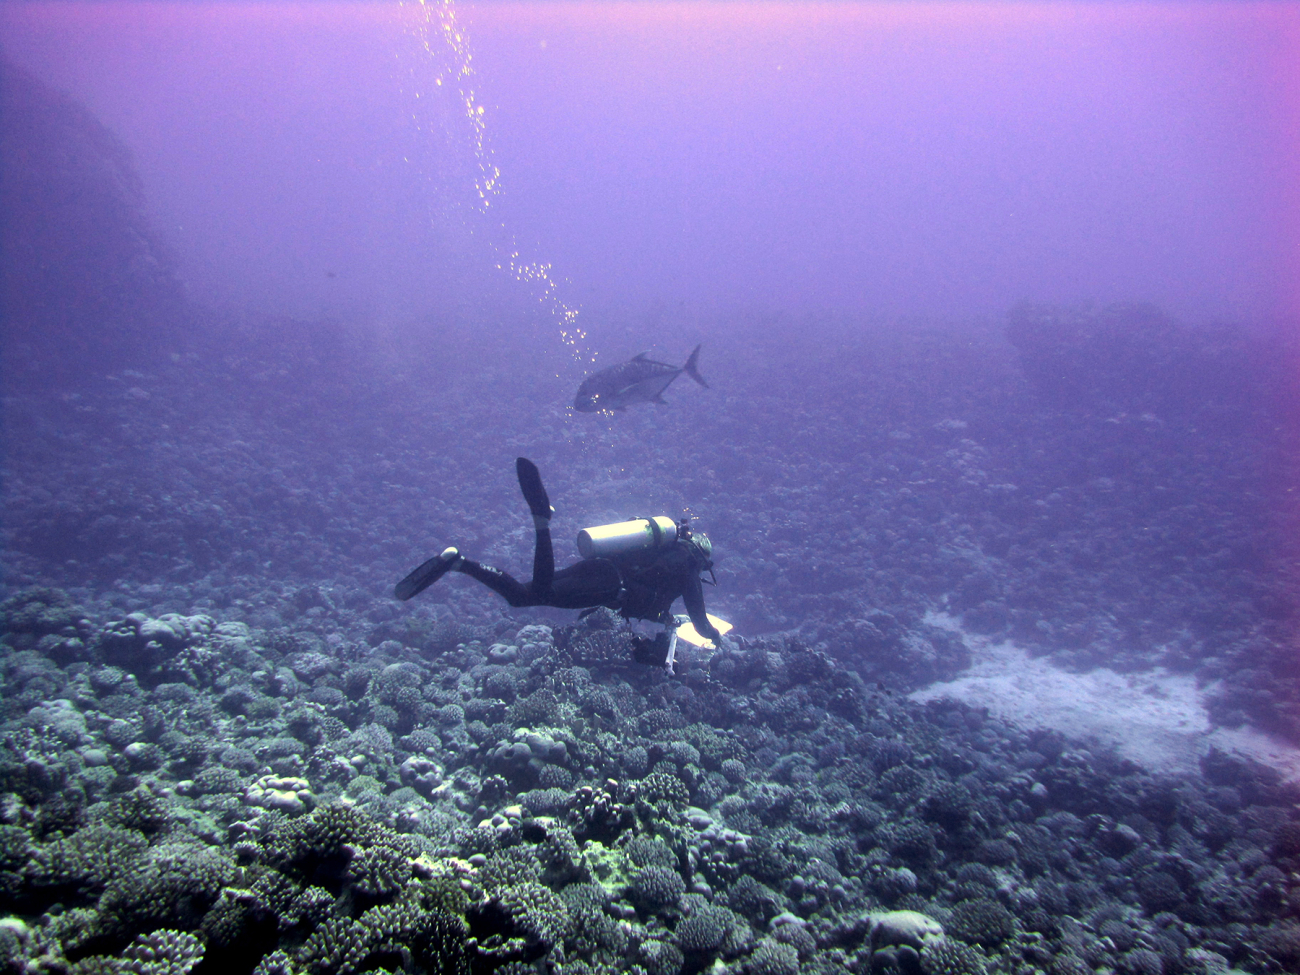 Scientists survey fish populations using the Stationary Point Count method, inwhich pairs of divers record the number, size, and species of all fishesobserved within adjacent visually estimated cylinders 15 meters in diameter